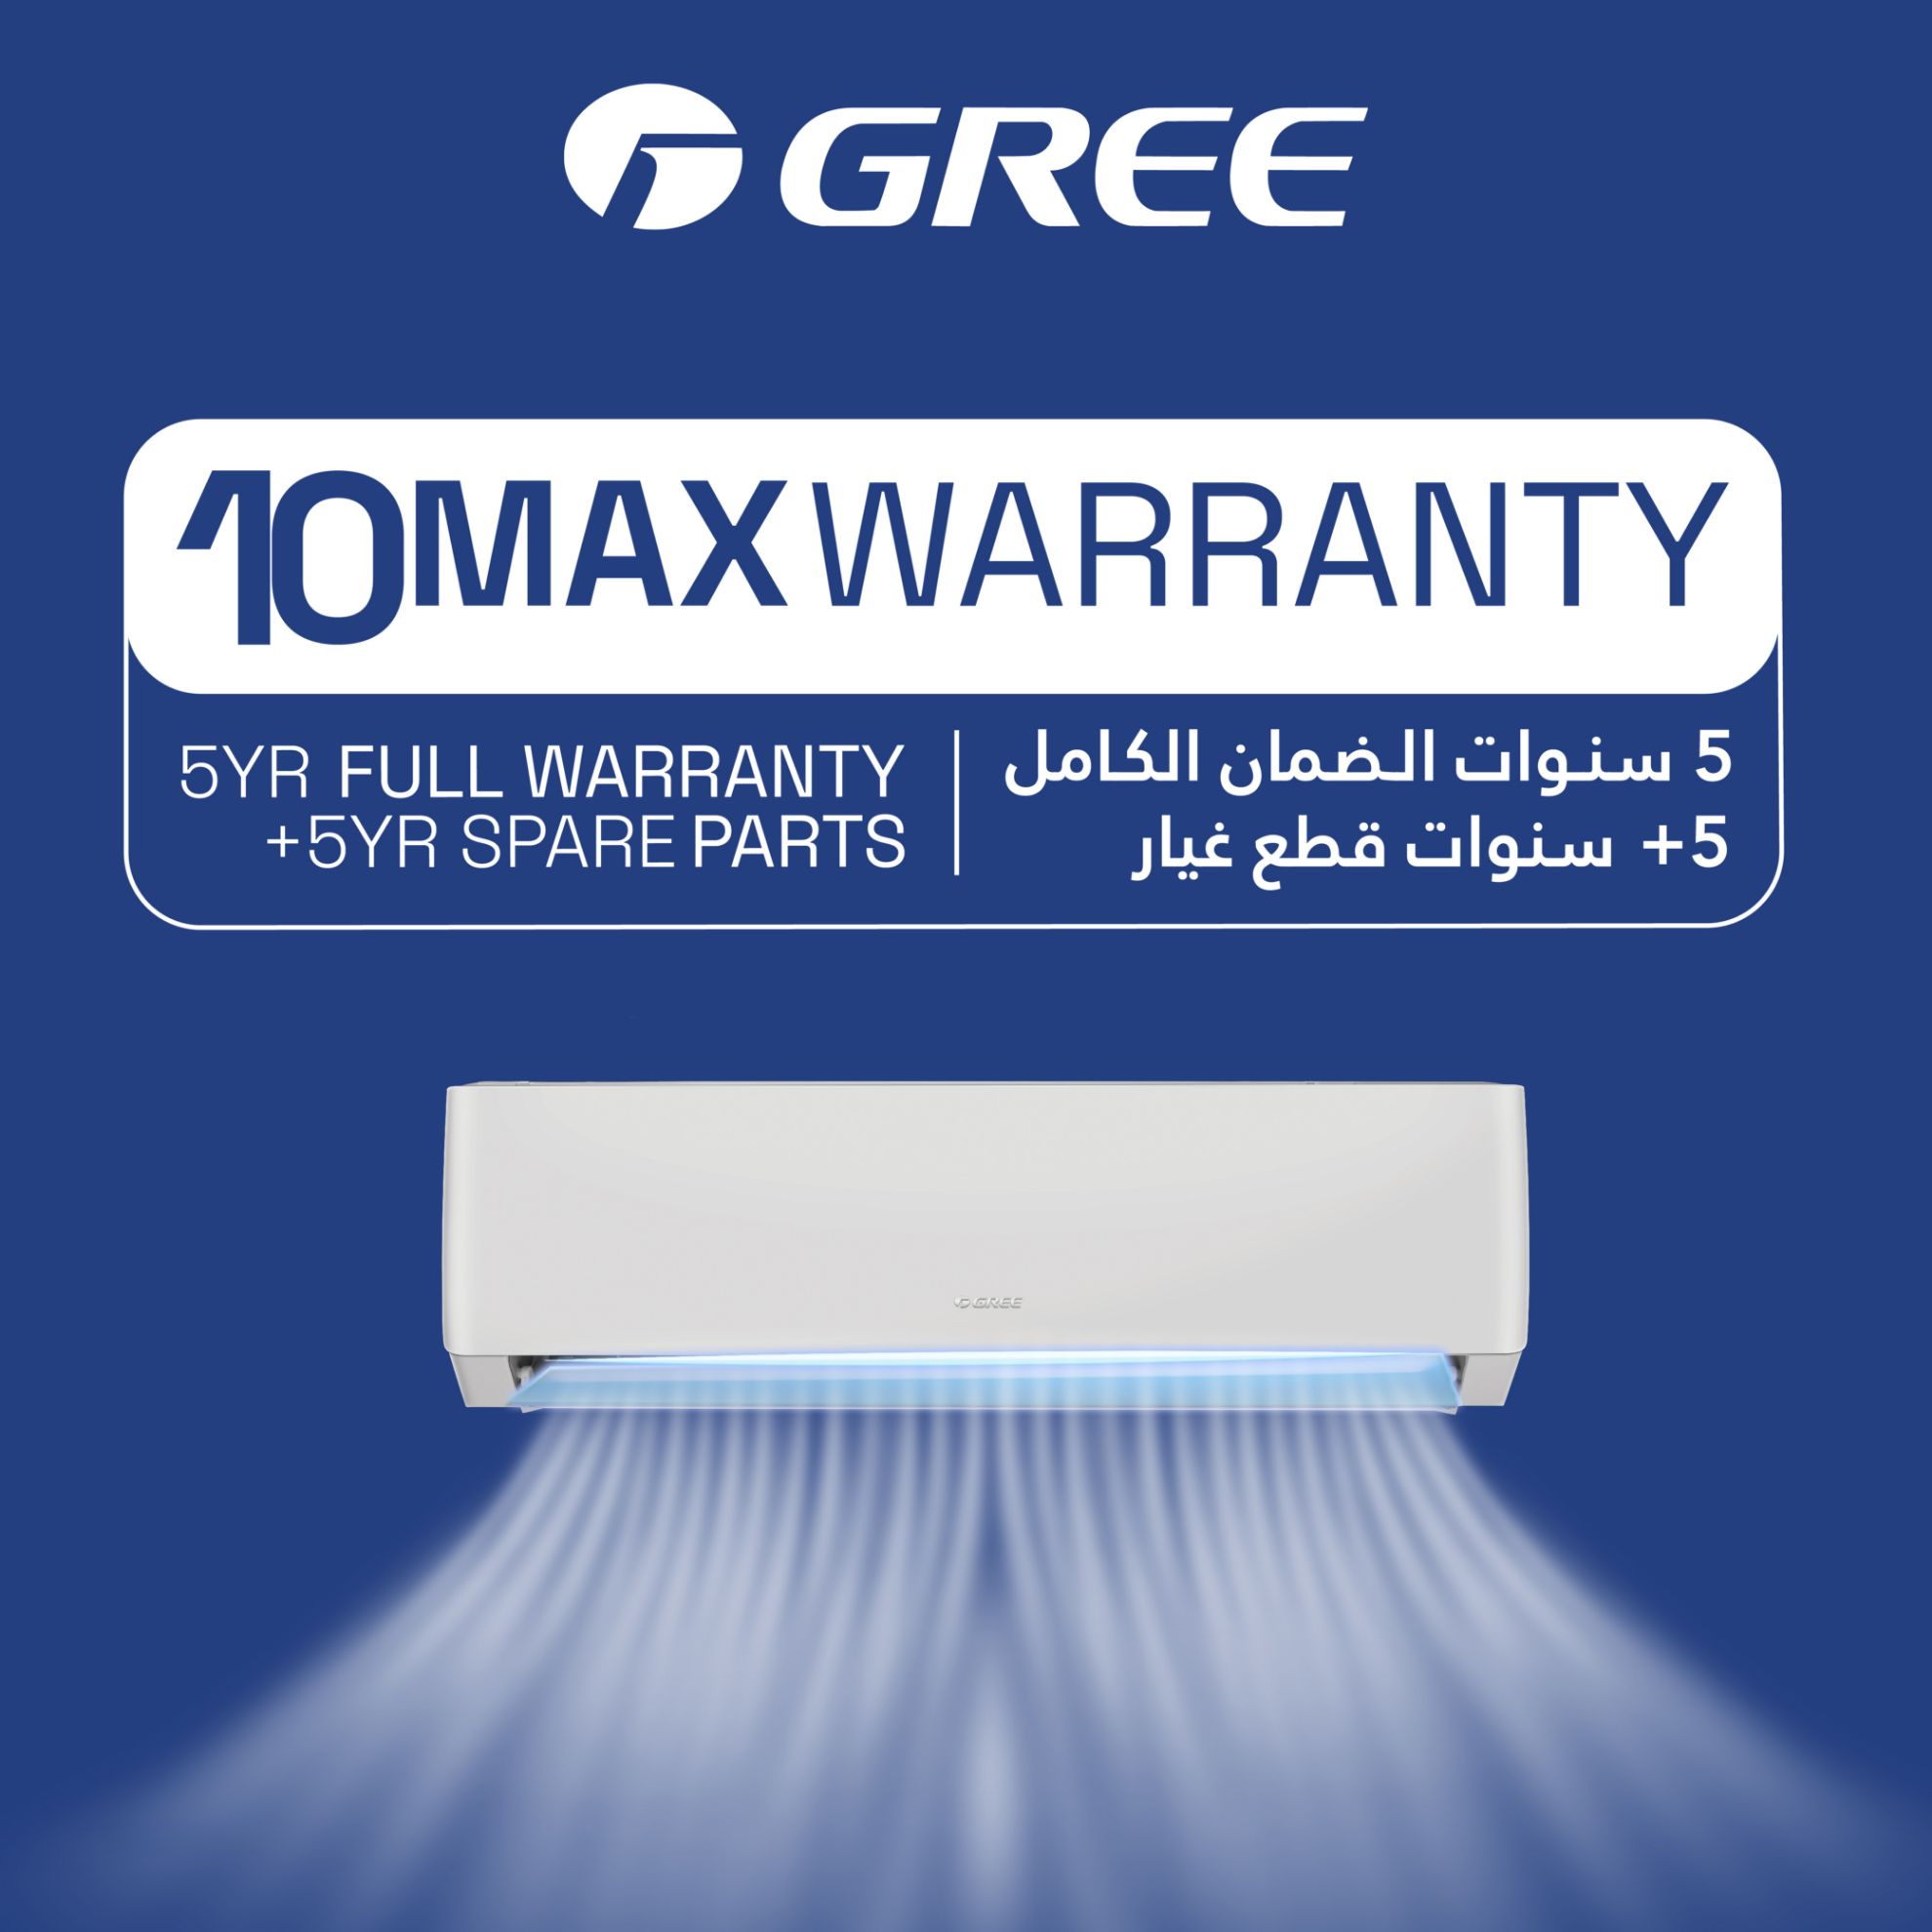 Picture of Gree - Lomo-P32C3 - 2.5 Ton|Reciprocating|Wall Split AC